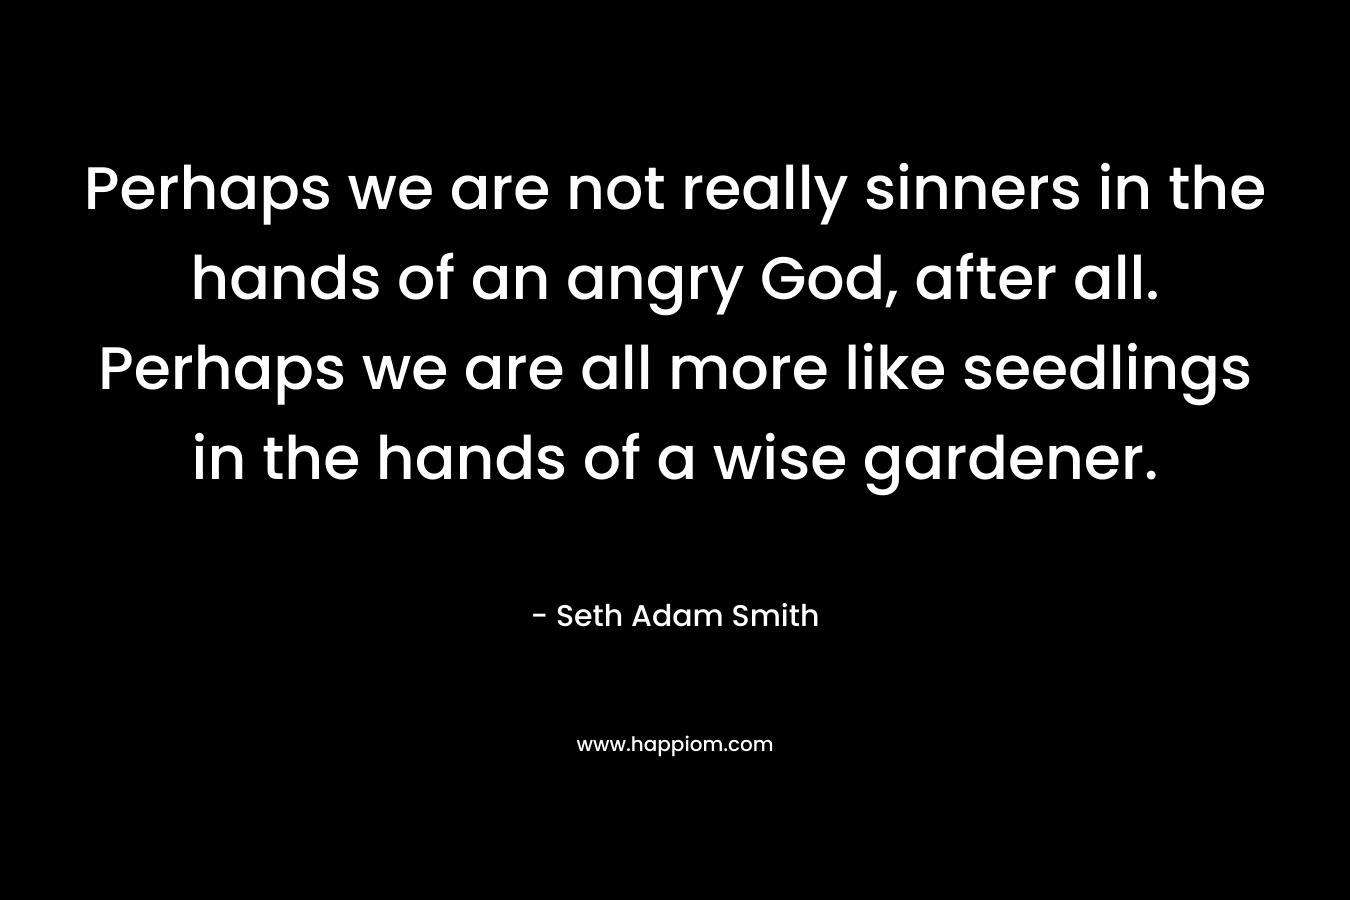 Perhaps we are not really sinners in the hands of an angry God, after all. Perhaps we are all more like seedlings in the hands of a wise gardener. – Seth Adam Smith